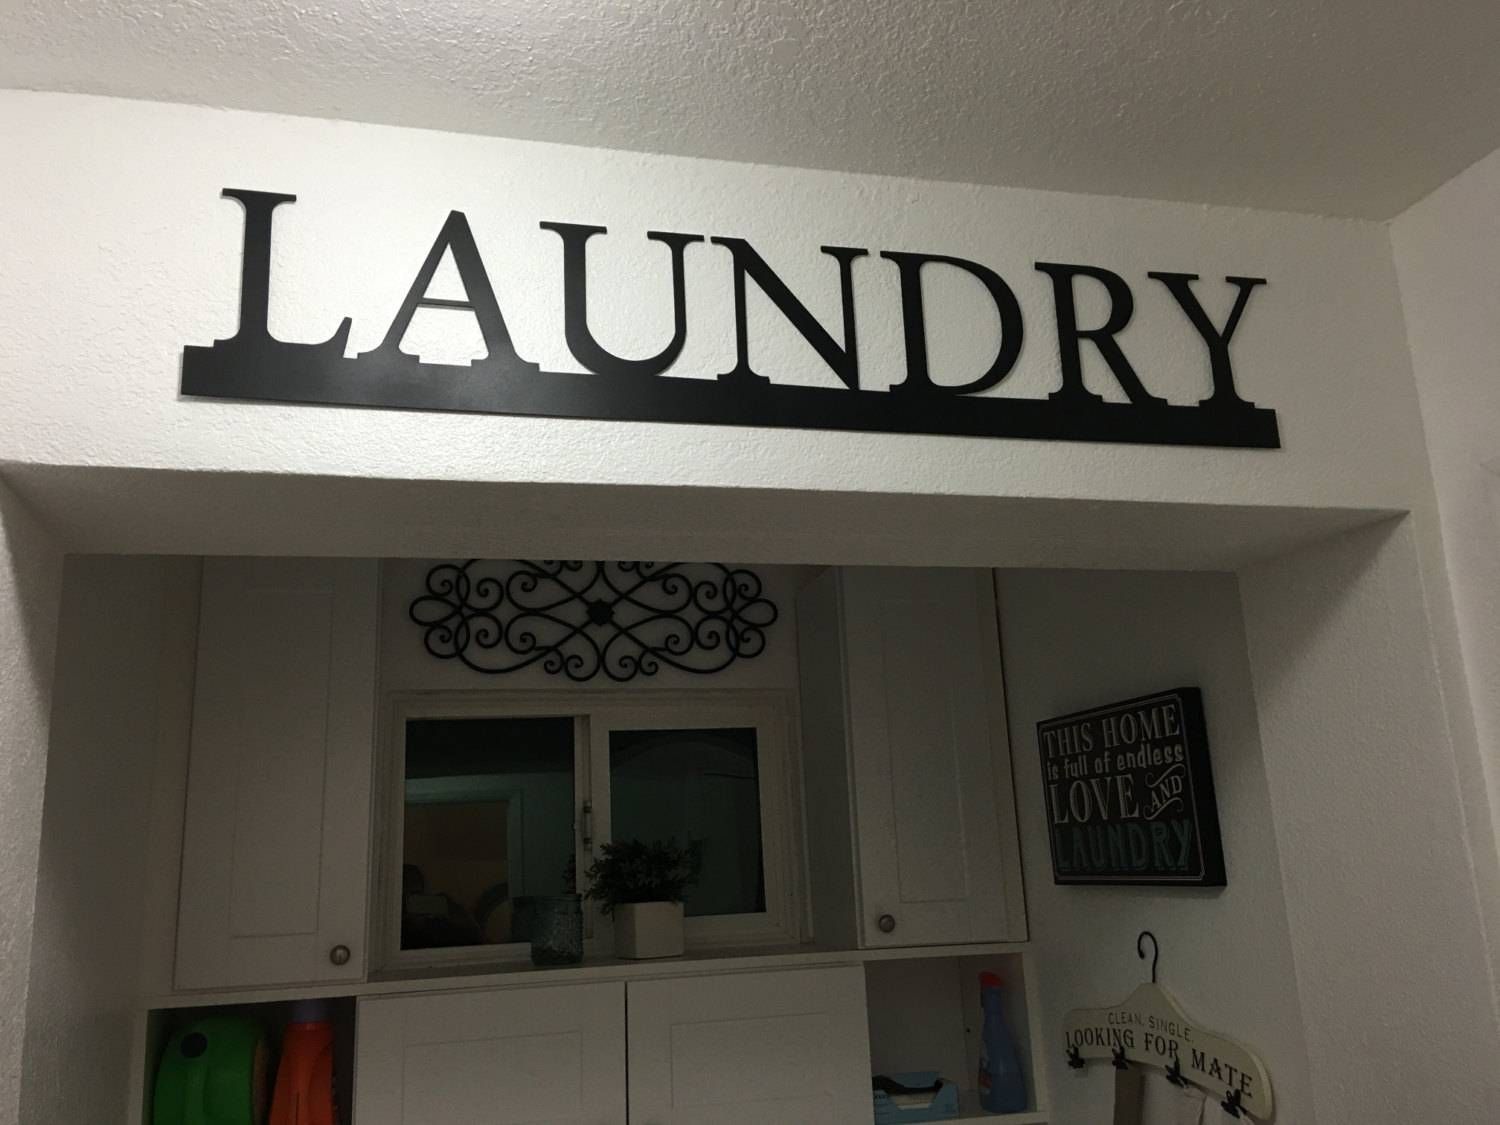 Laundry Sign – Metal Laundry – Home Decor – Laundry Room Decor With Best And Newest Laundry Room Wall Art (View 16 of 30)